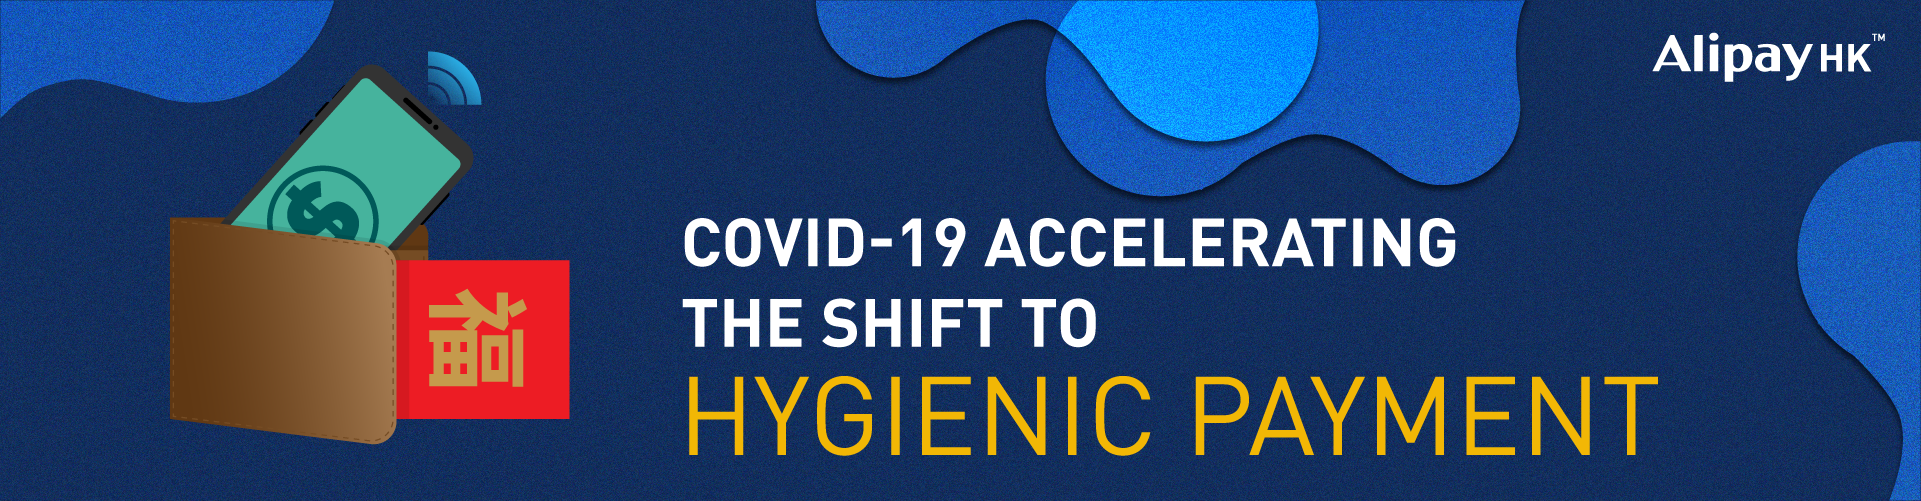 Covid-19 Accelerating the Shift to Hygienic Payment